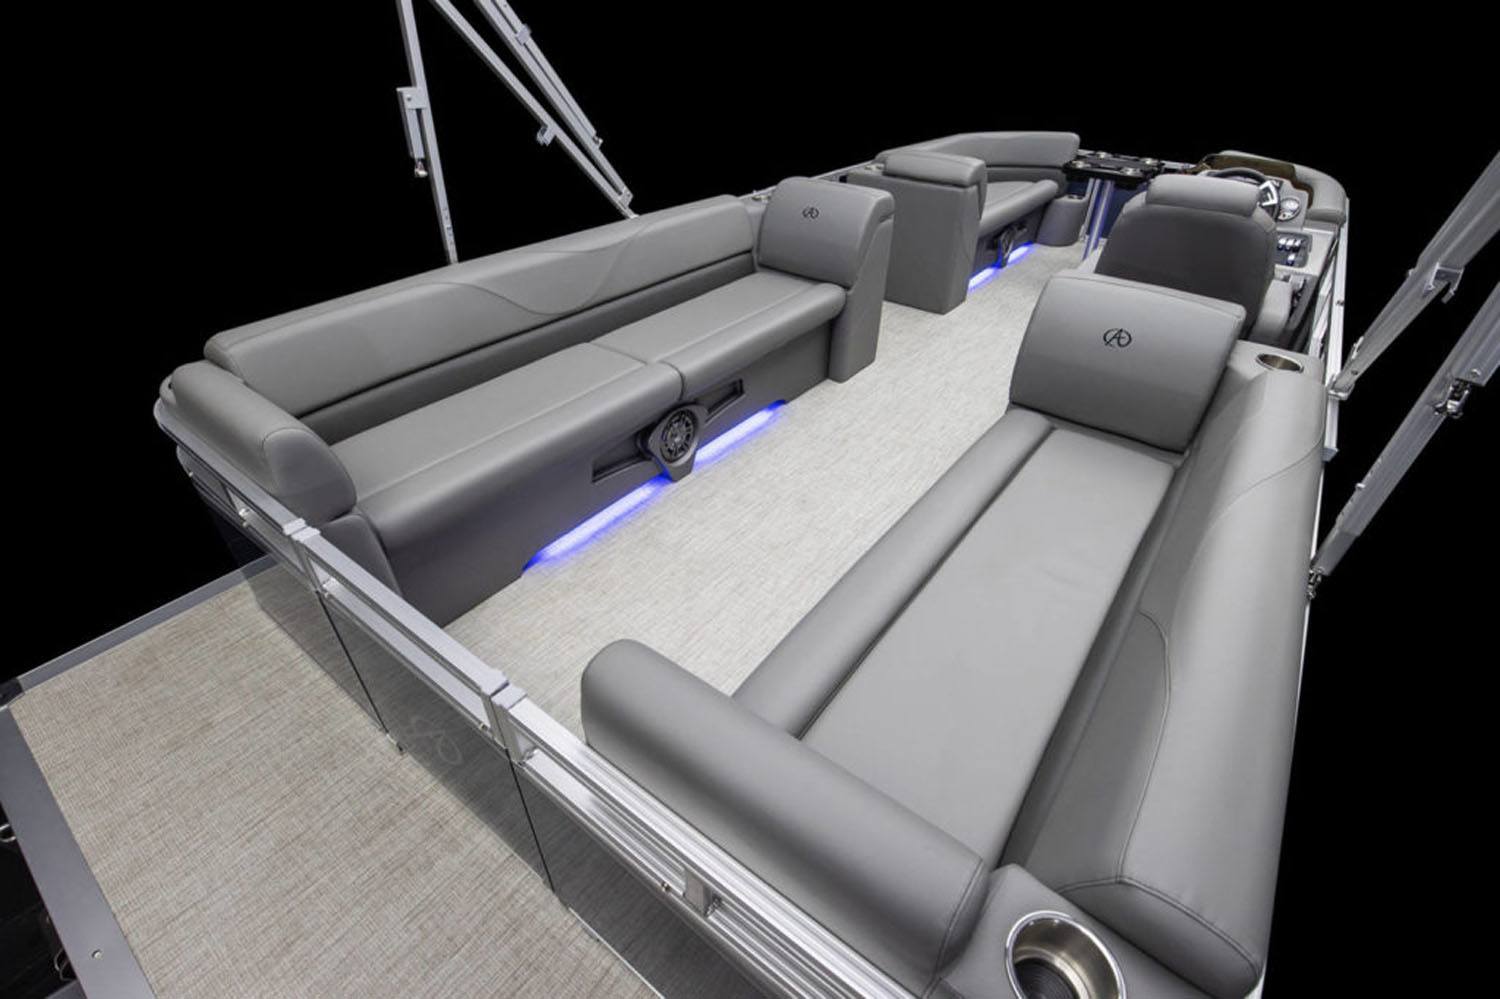 2022 Avalon VLS Quad Lounger - 18' in Memphis, Tennessee - Photo 4